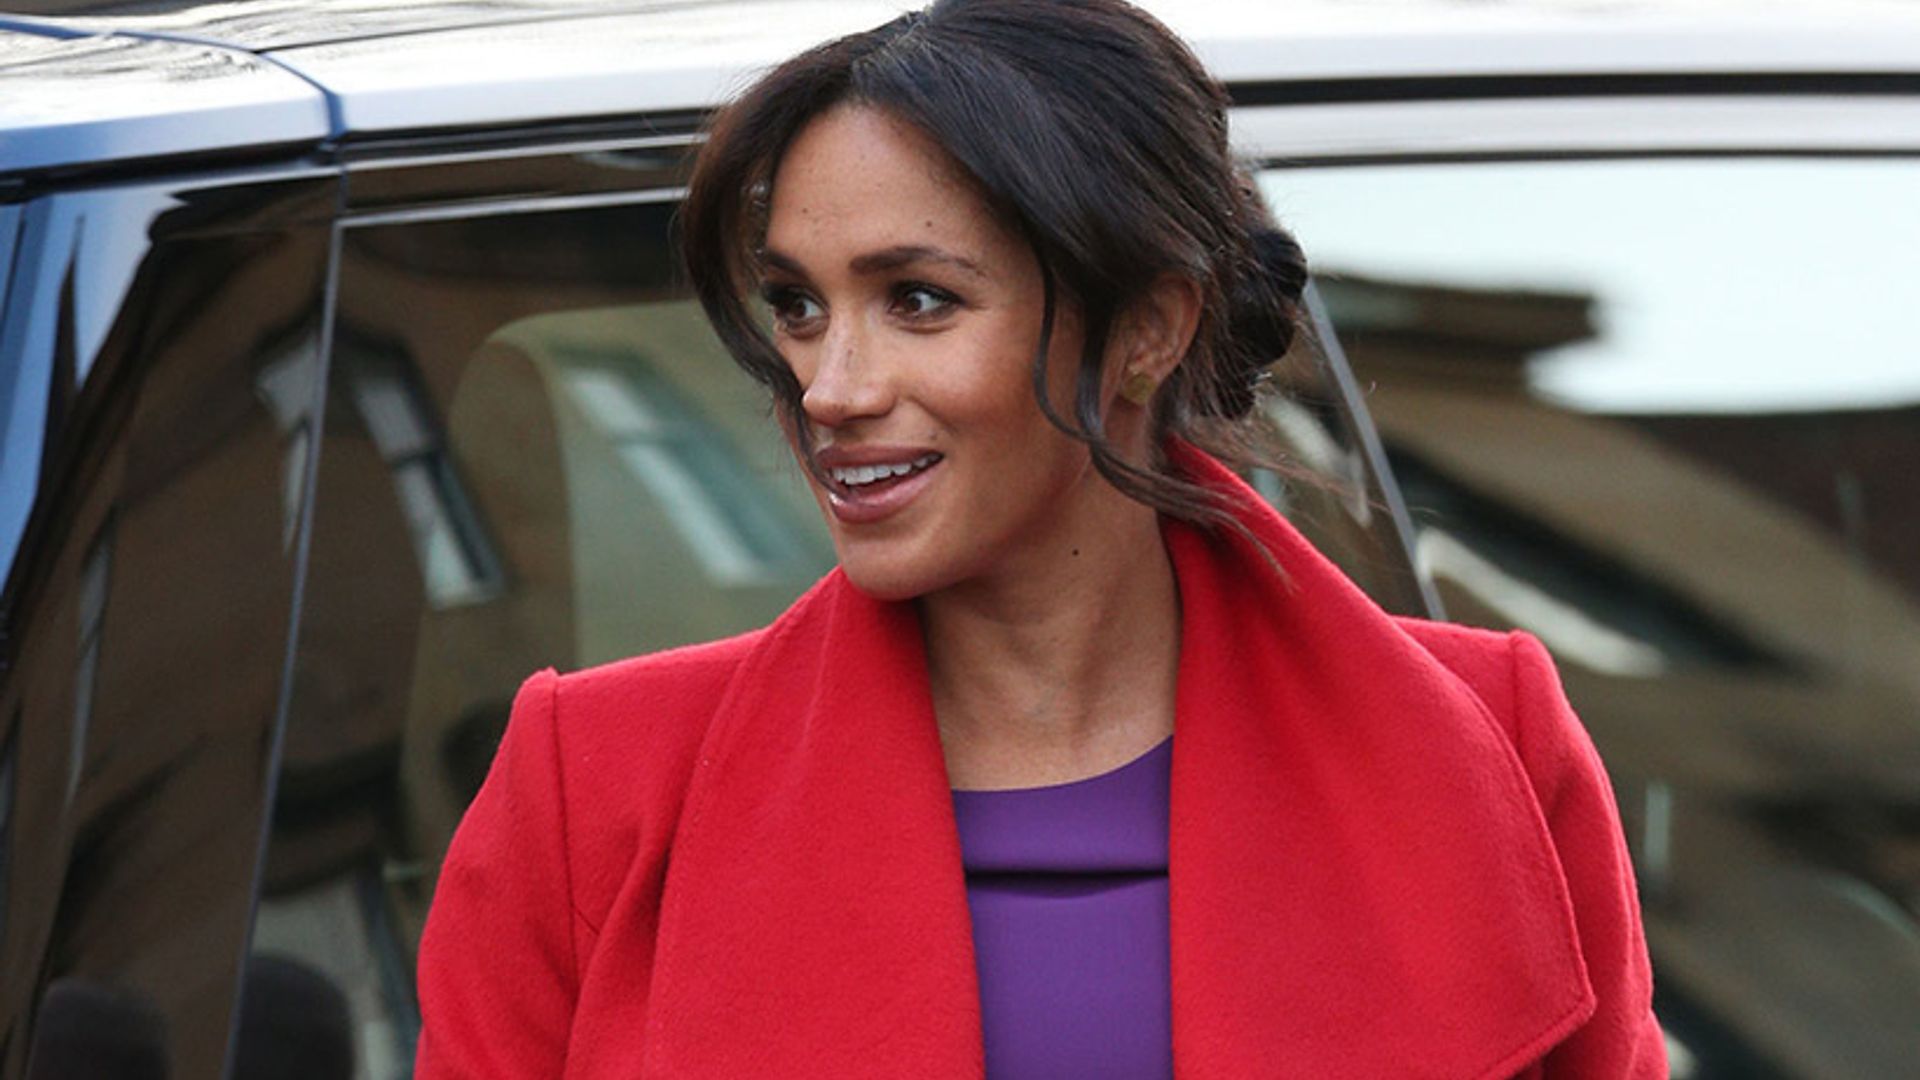 Meghan Markle and baby bump make bright appearance in Birkenhead – best photos 